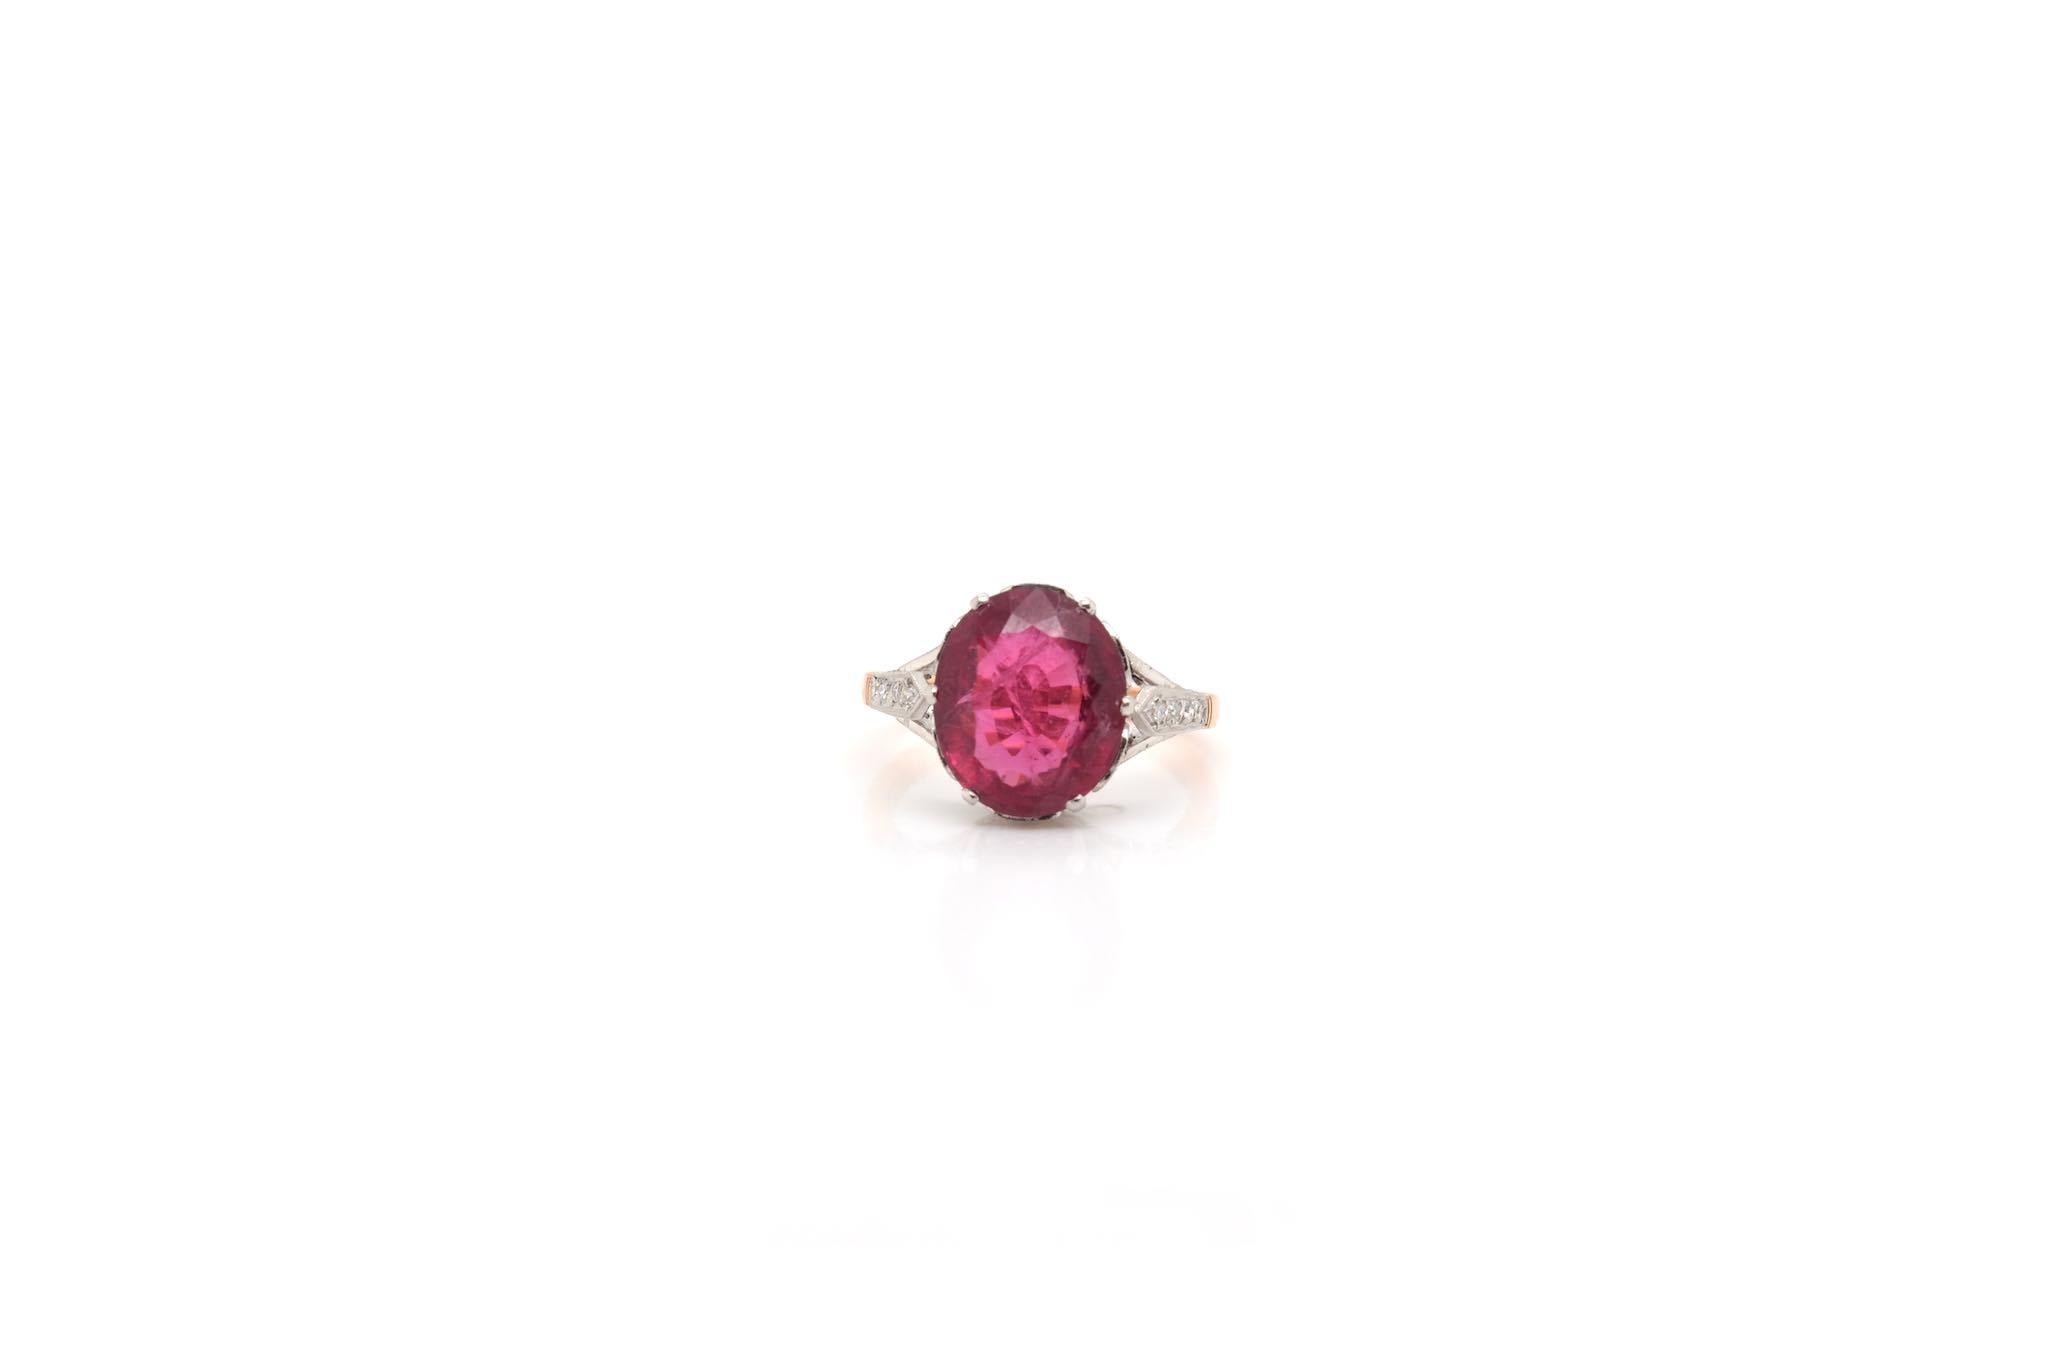 Stones: Rubellite of 5.41 carats and diamonds
Material: 18k white gold and platinum
Dimensions: 1.30cm
Period: Recent (old style)
Weight: 5.41 g
Size: 53 (free sizing)
Certificate
Ref. : 24222 - 23968